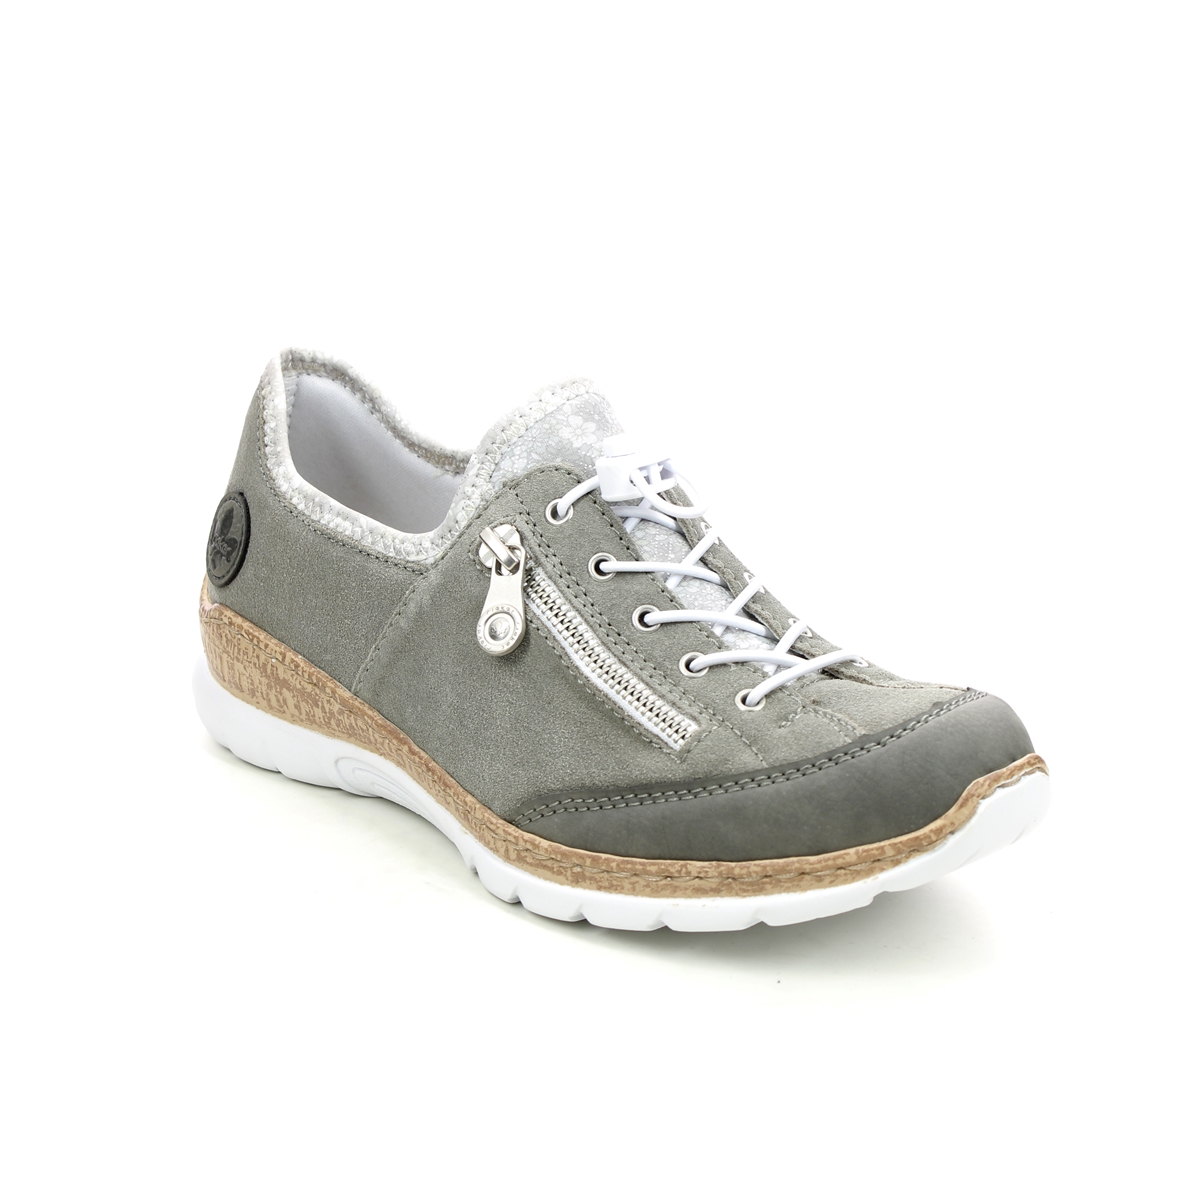 Rieker Empire 11 Taupe Leather Womens Lacing Shoes N42F1-40 In Size 38 In Plain Taupe Leather